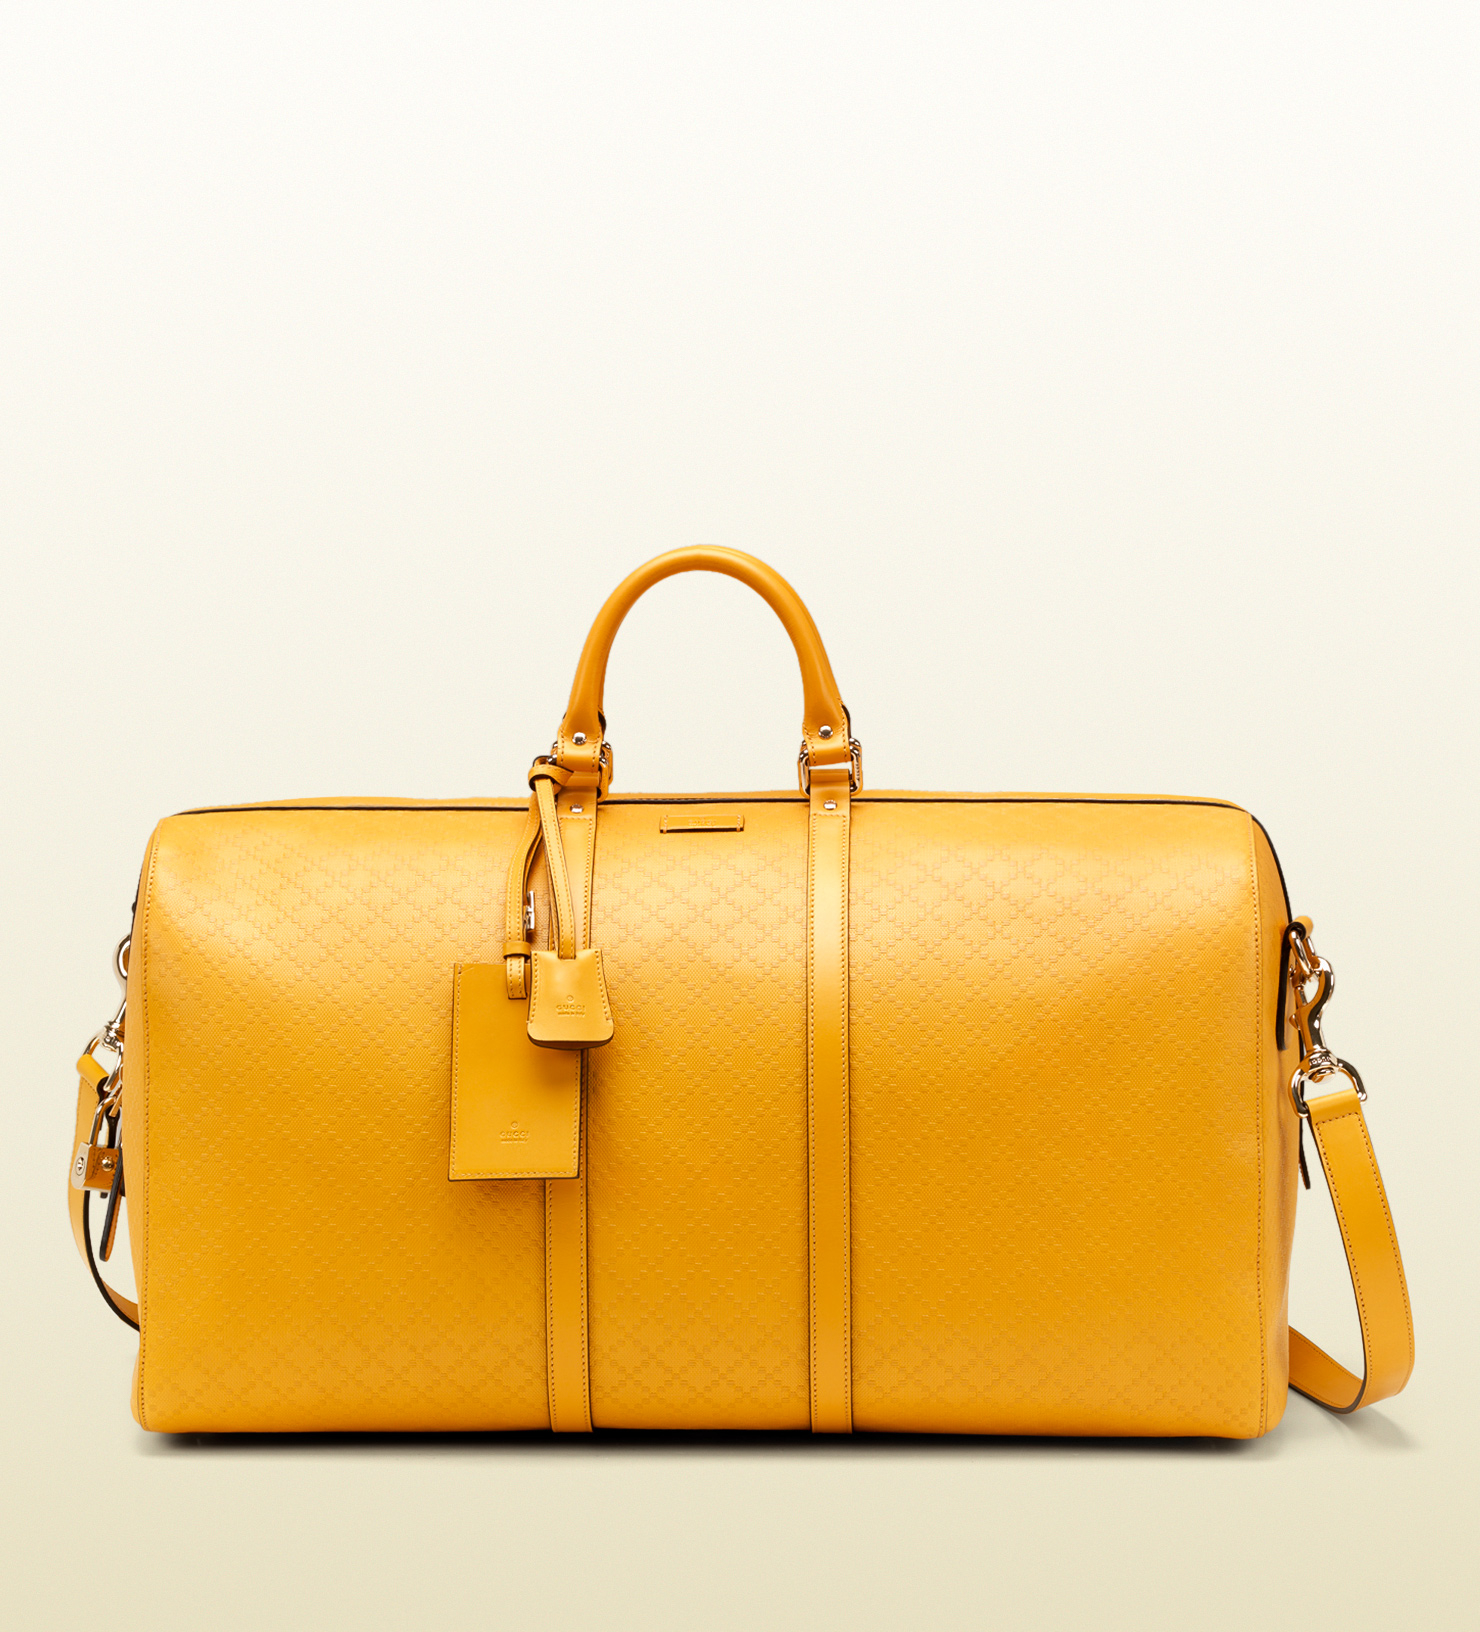 Gucci Diamante Lux Leather Carryon Duffle Bag in Yellow